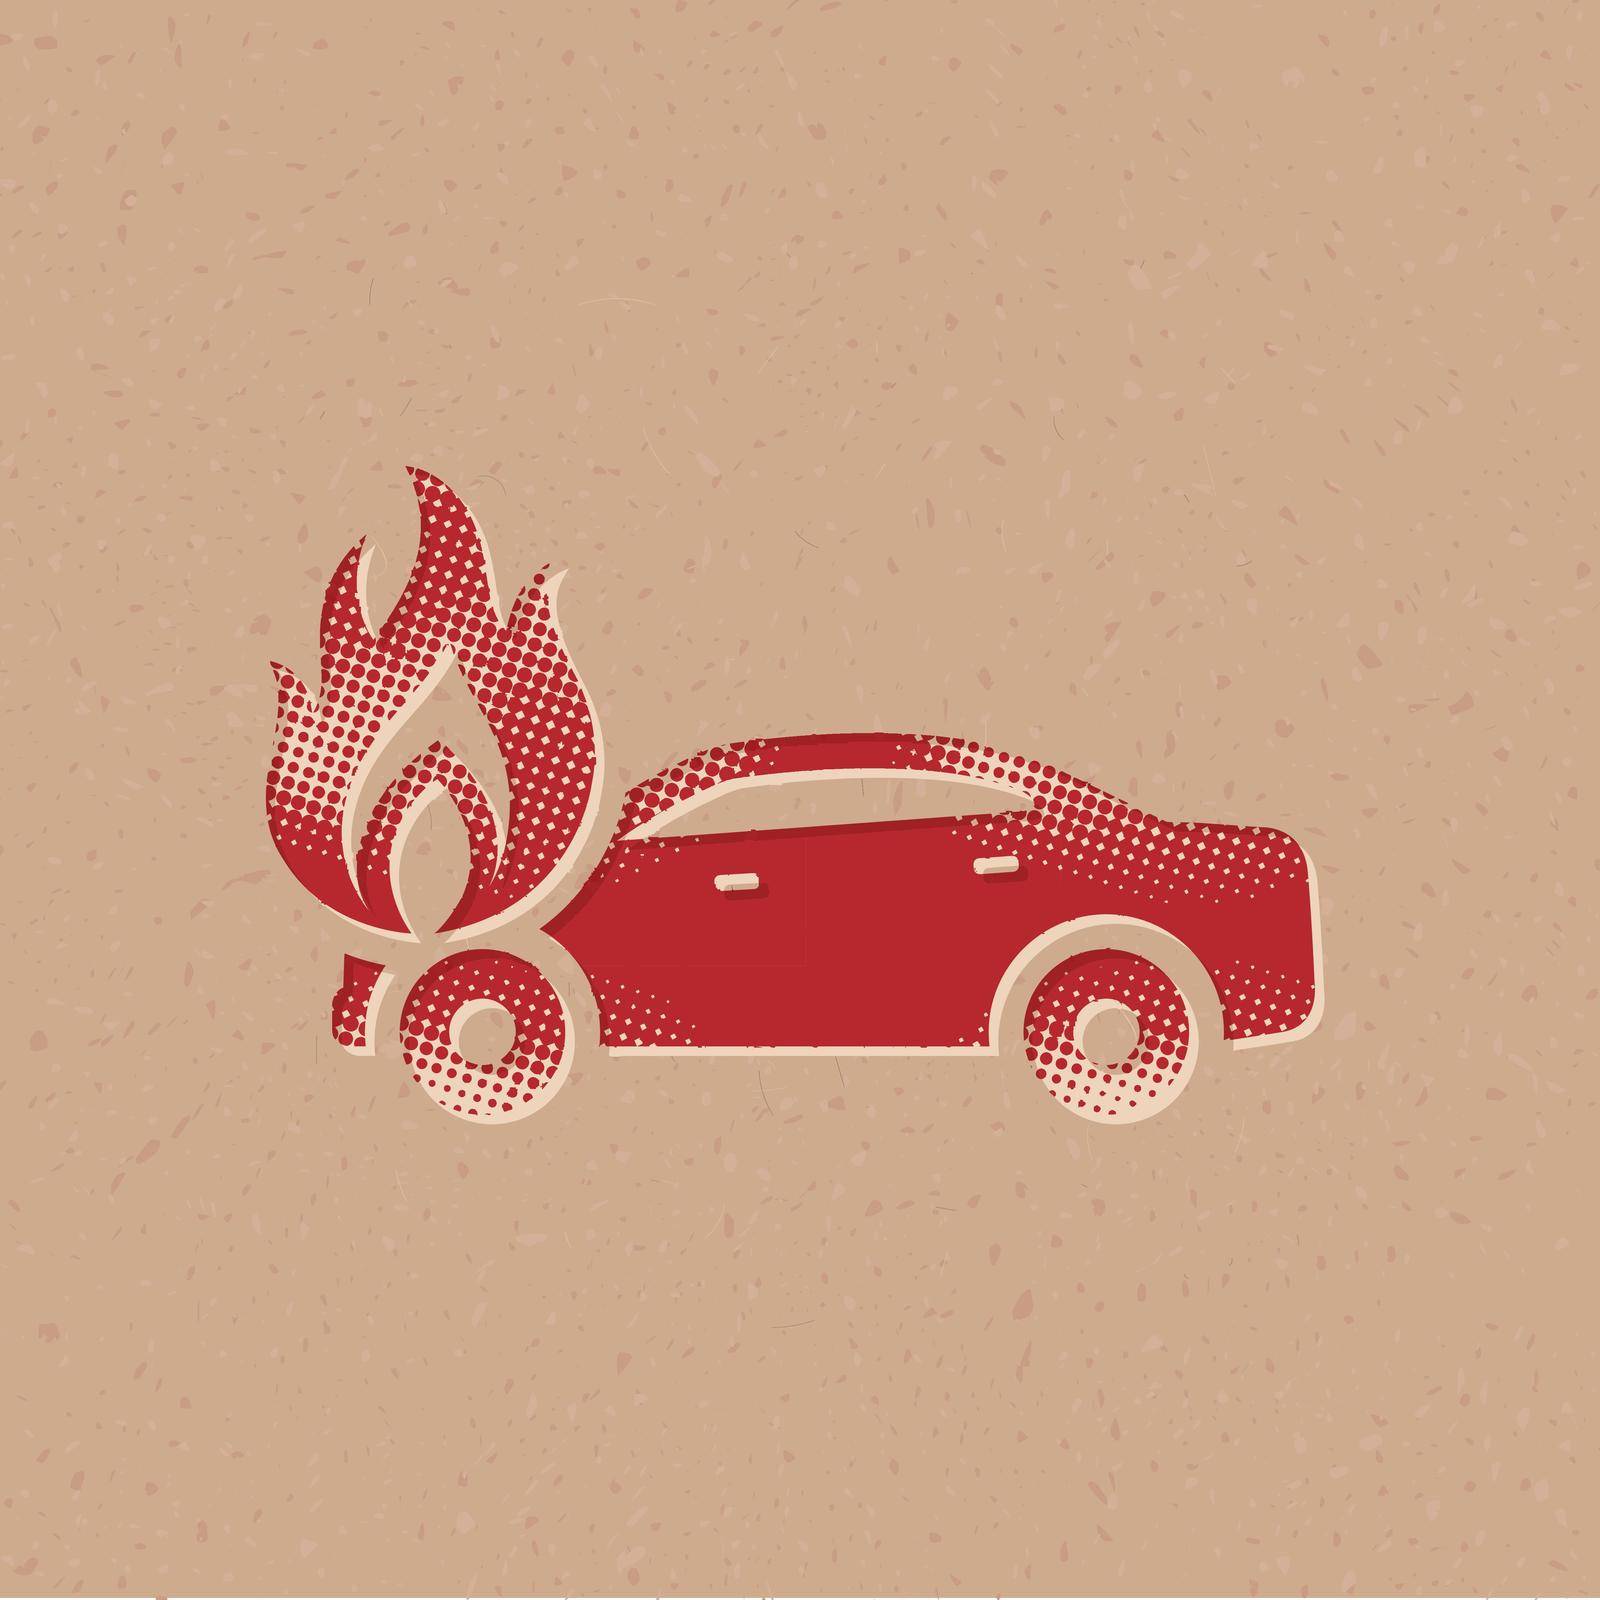 Car on fire icon in halftone style. Grunge background vector illustration.